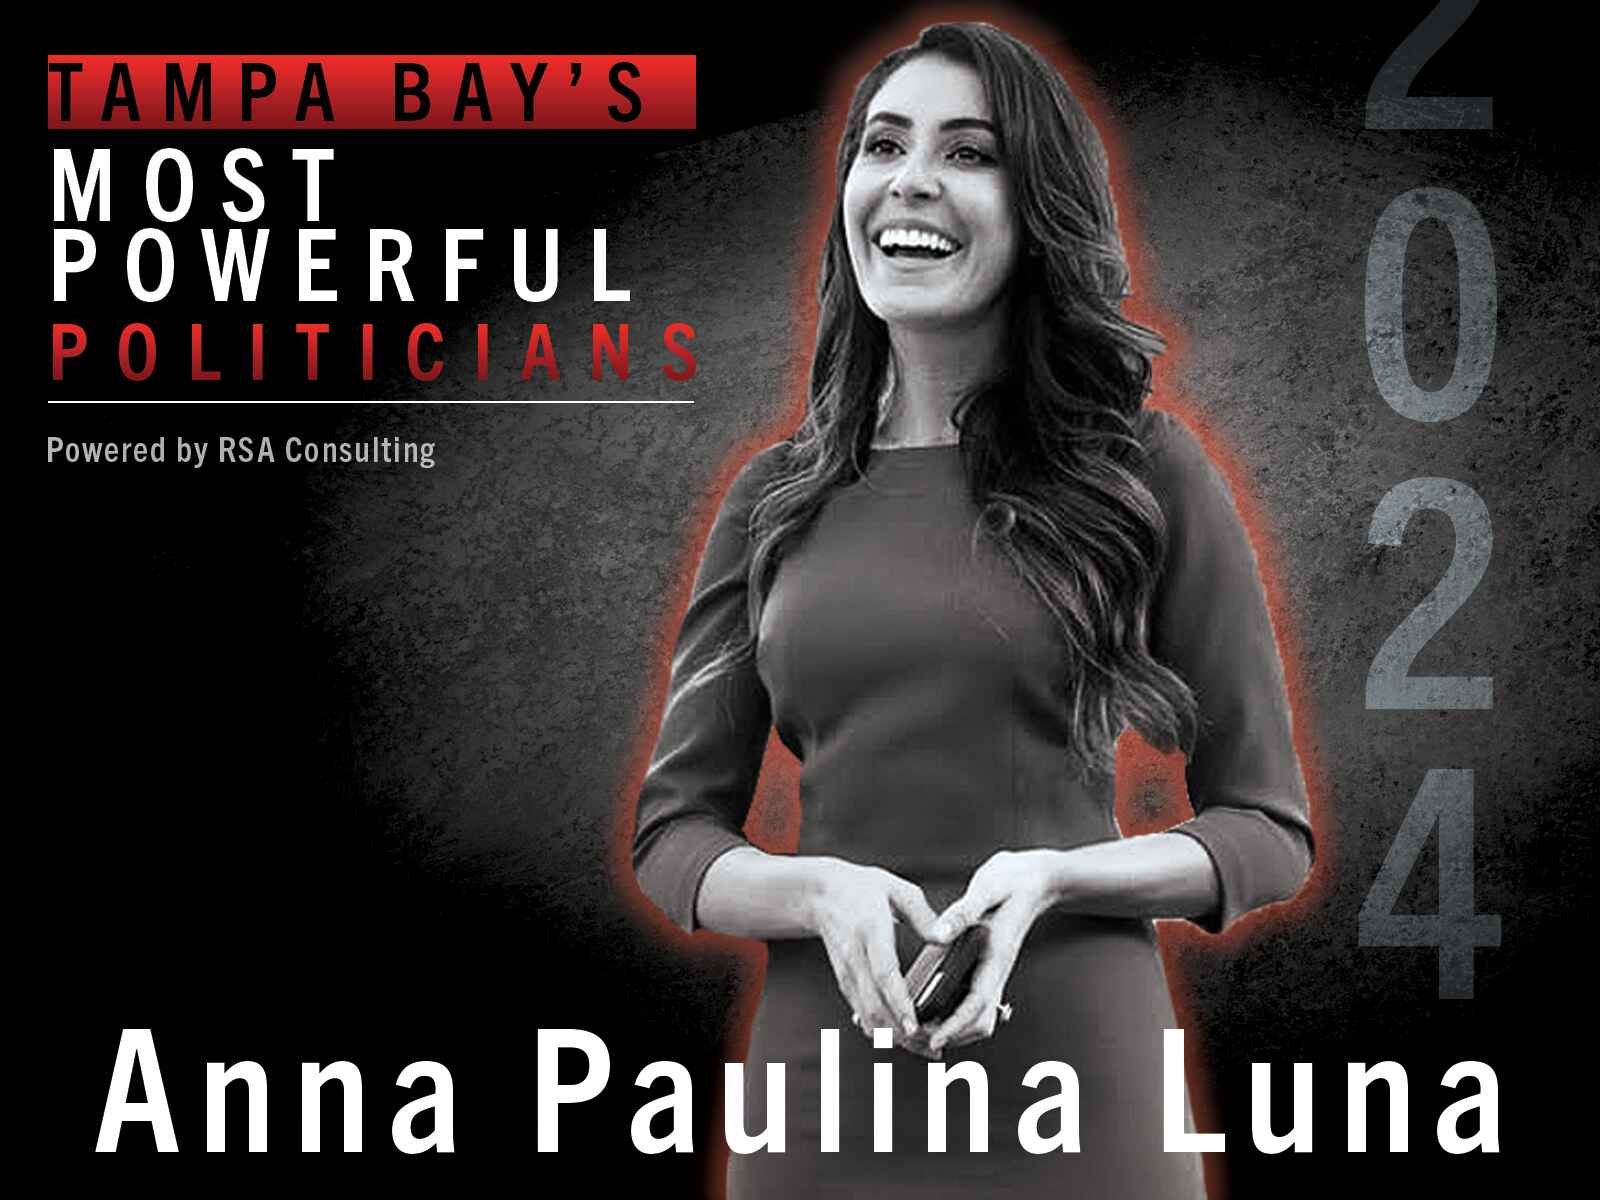 No. 24 on the list of Tampa Bay’s Most Powerful Politicians: Anna Paulina Luna